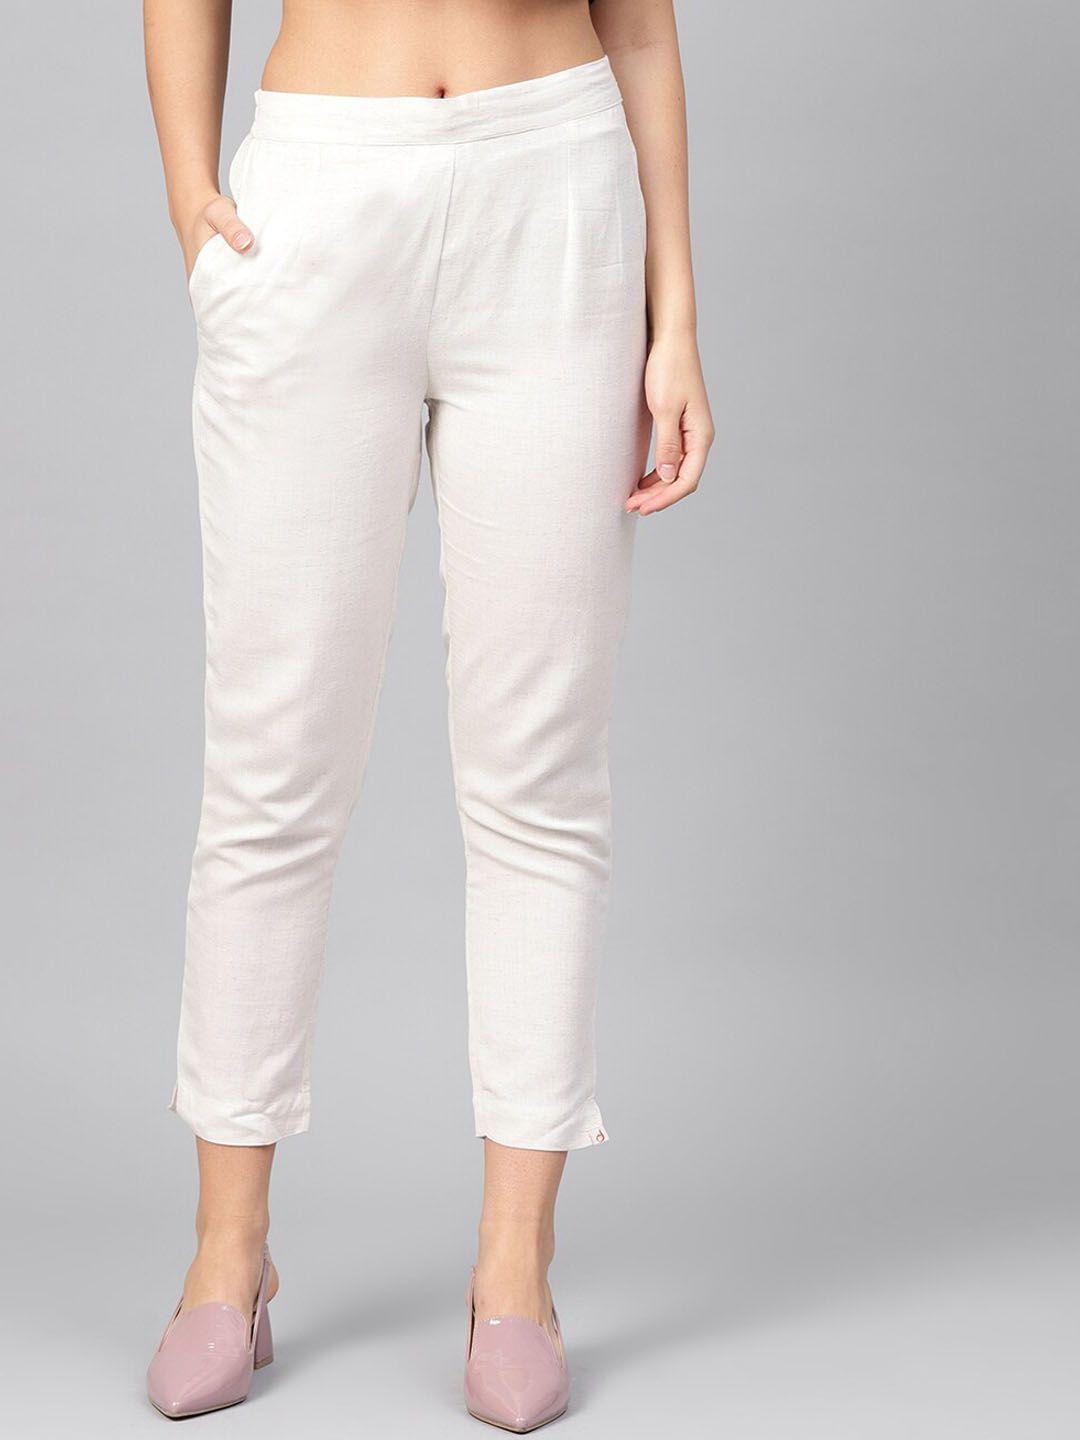 juniper-women-mid-rise-relaxed-slim-fit-casual-trousers